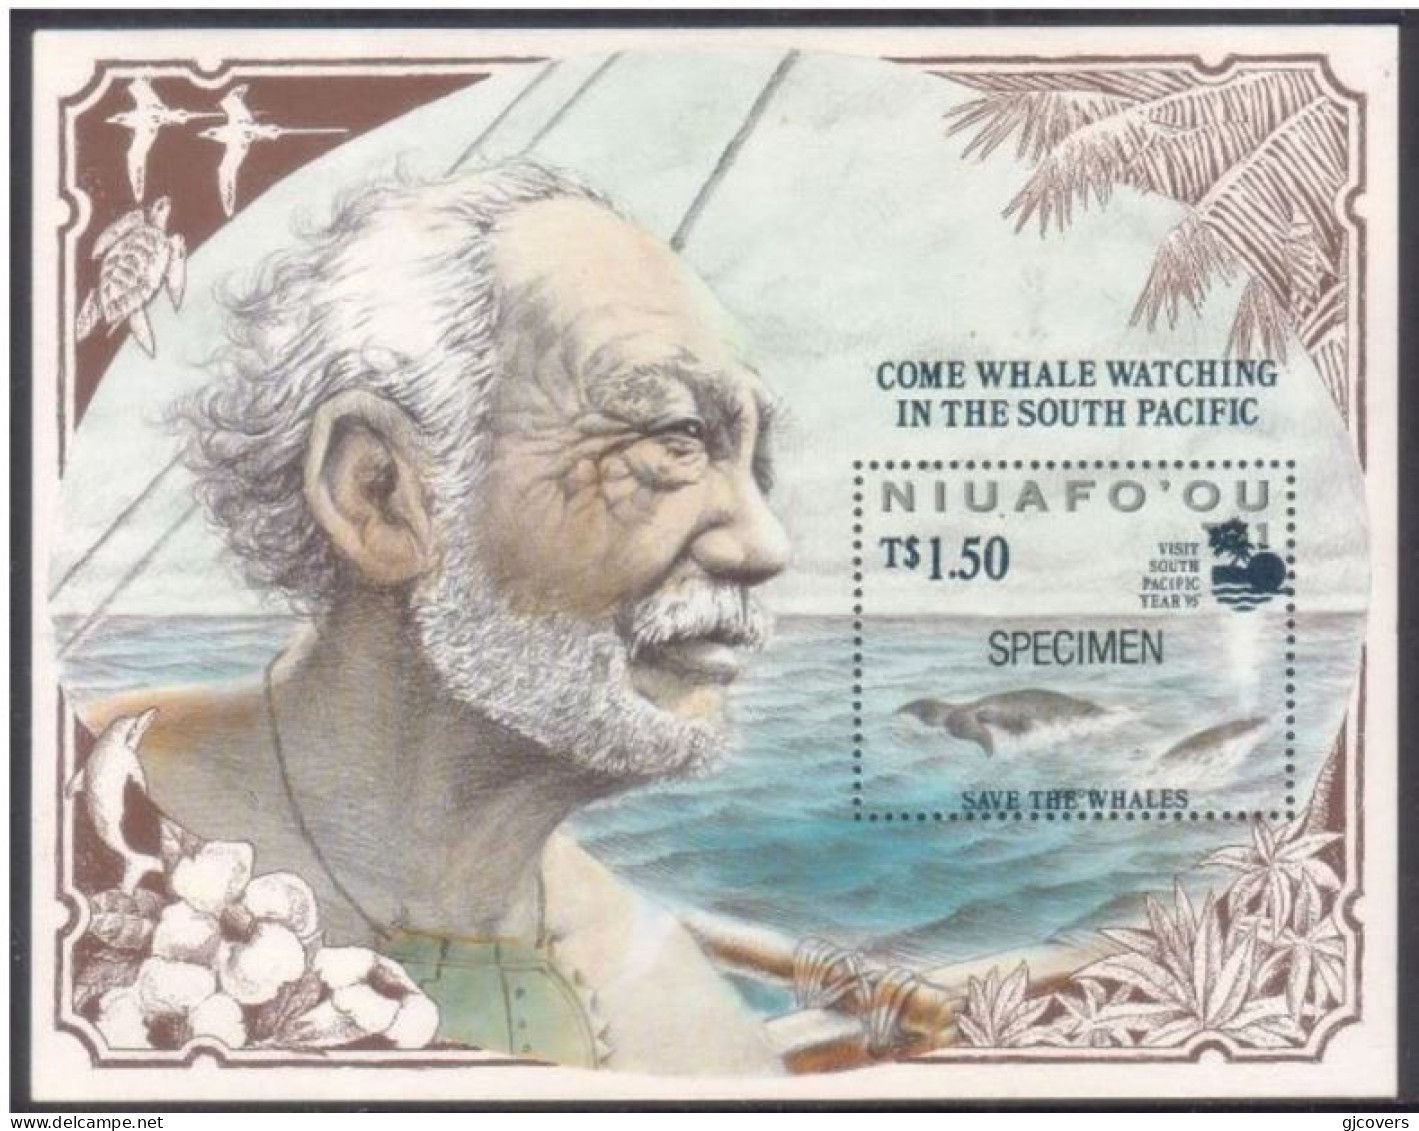 Tonga Niuafo'ou 1995 S/S  - Ovpt "Come Whale Watching" & "Save The Whales" Specimen - Ballenas